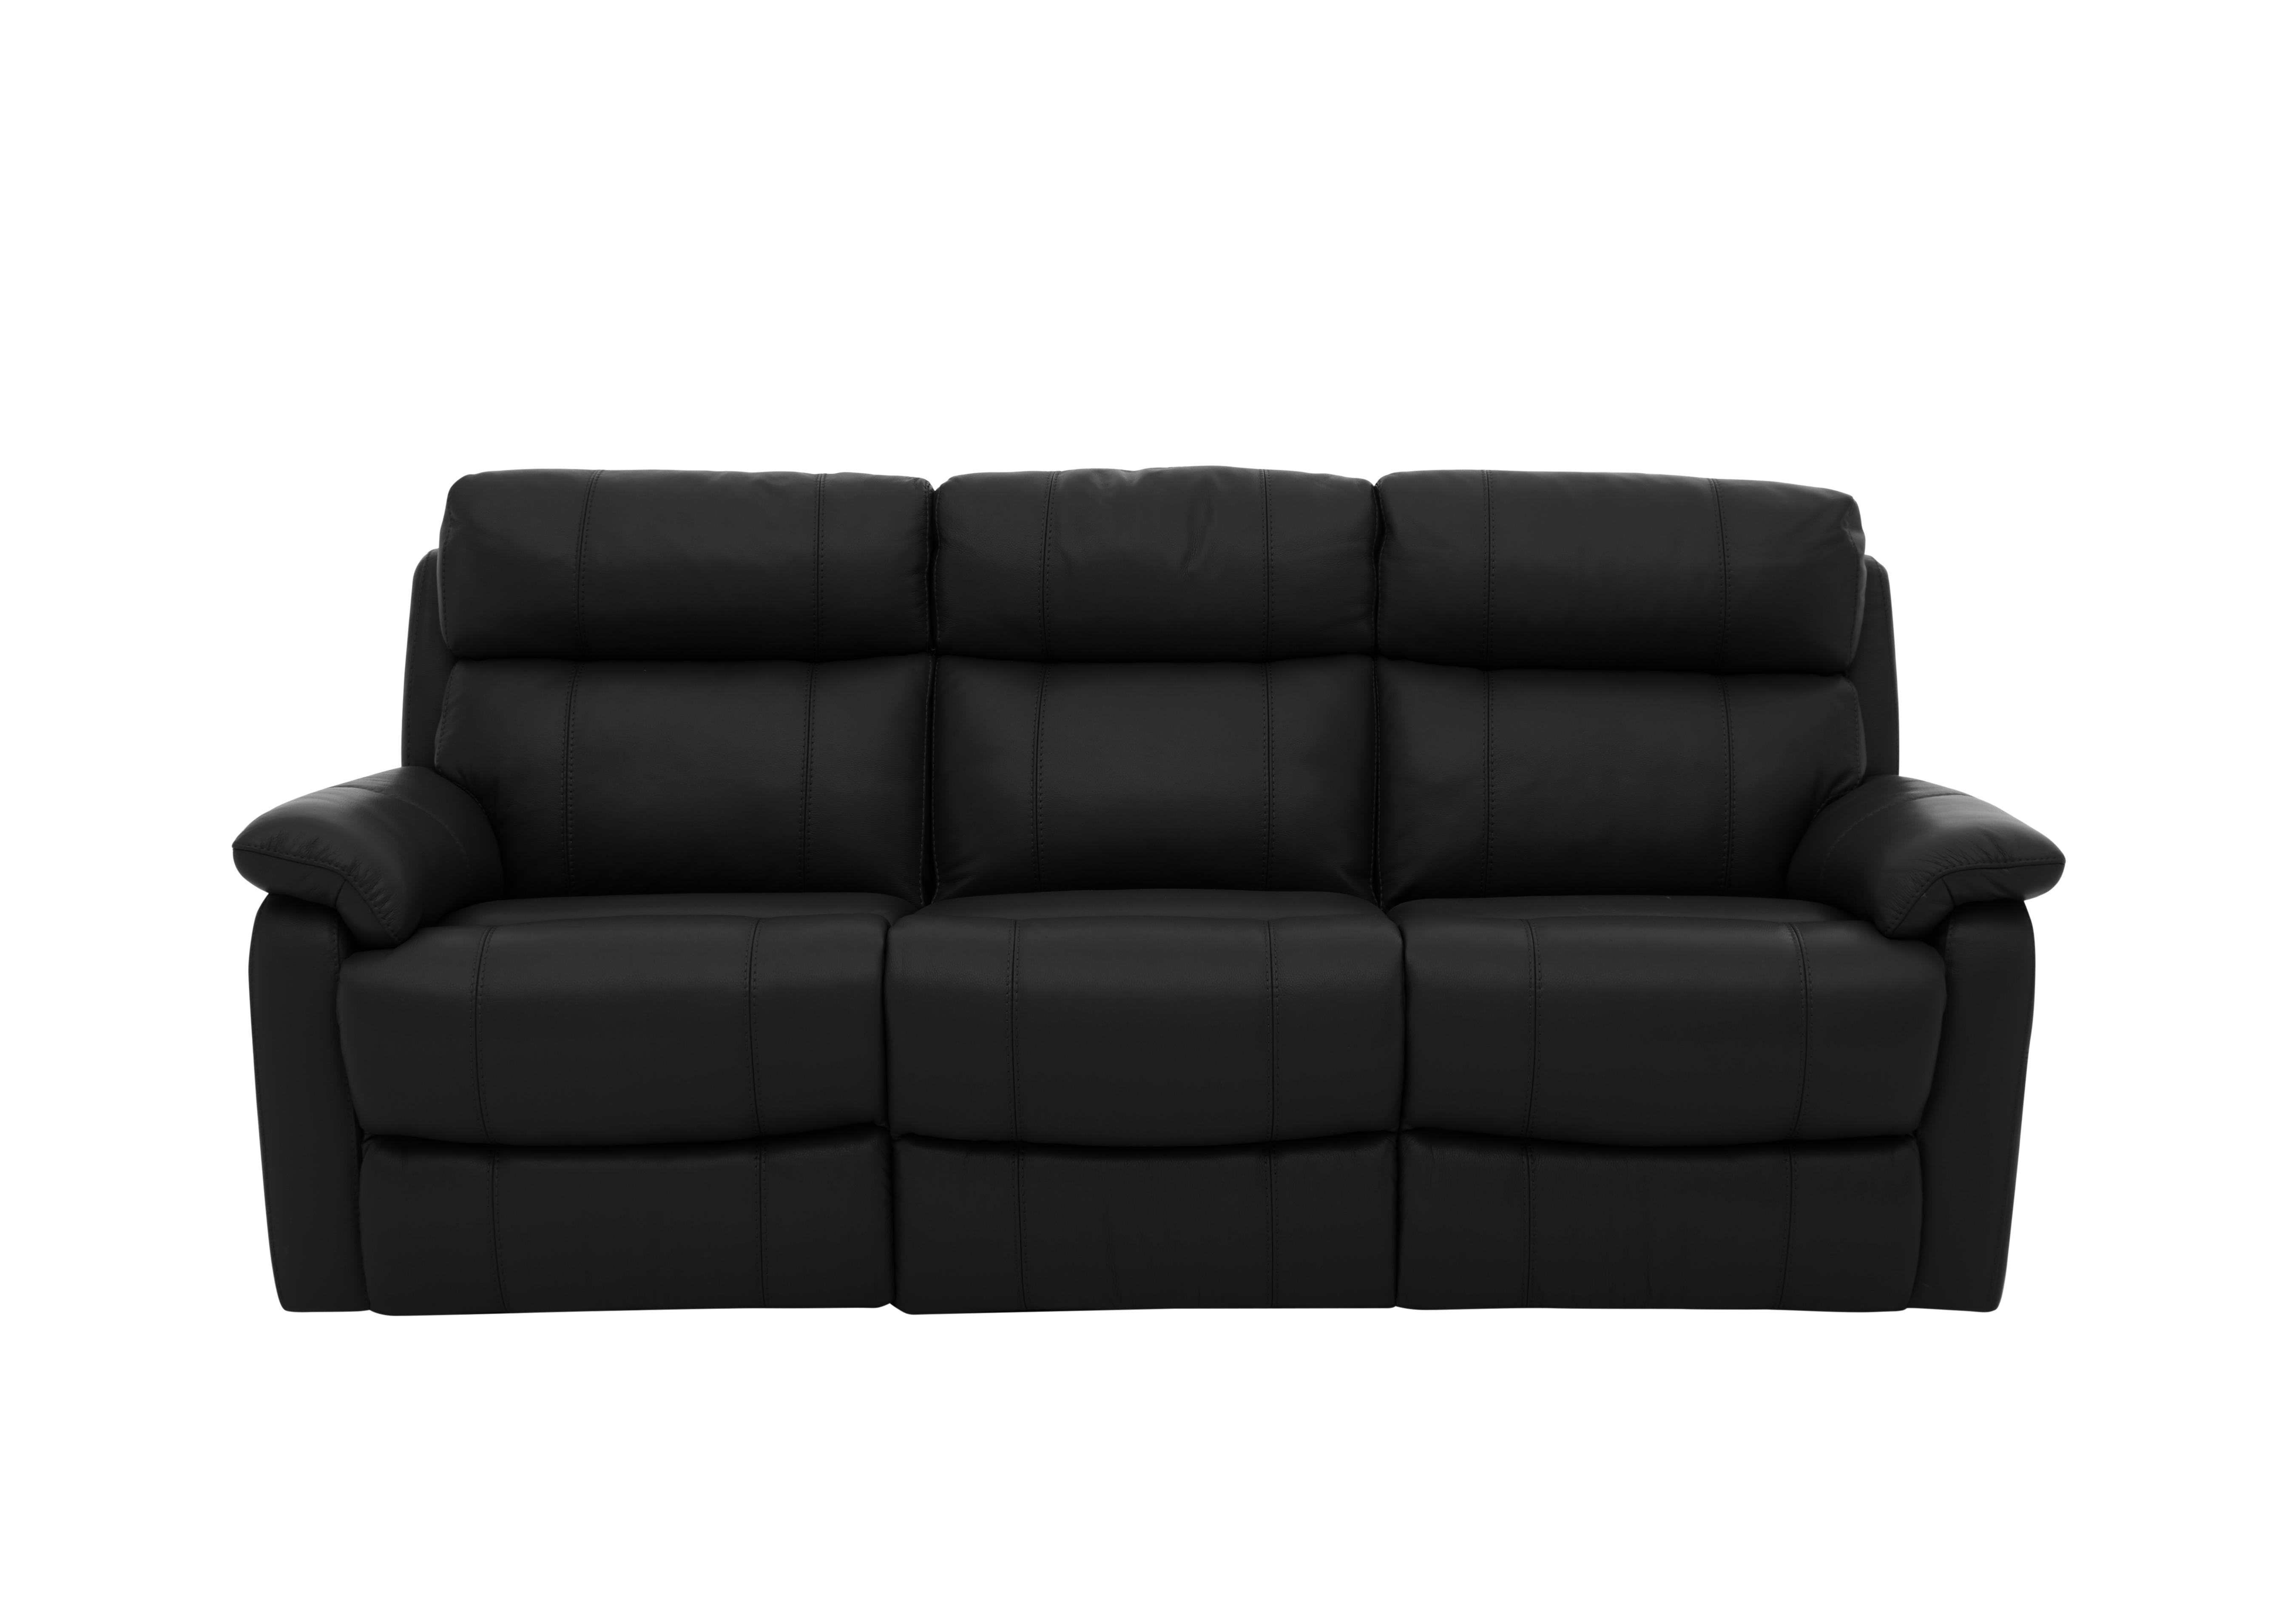 Relax Station Komodo 3 Seater Leather Sofa with Power Headrests and Cup Holders in Bv-3500 Classic Black on Furniture Village